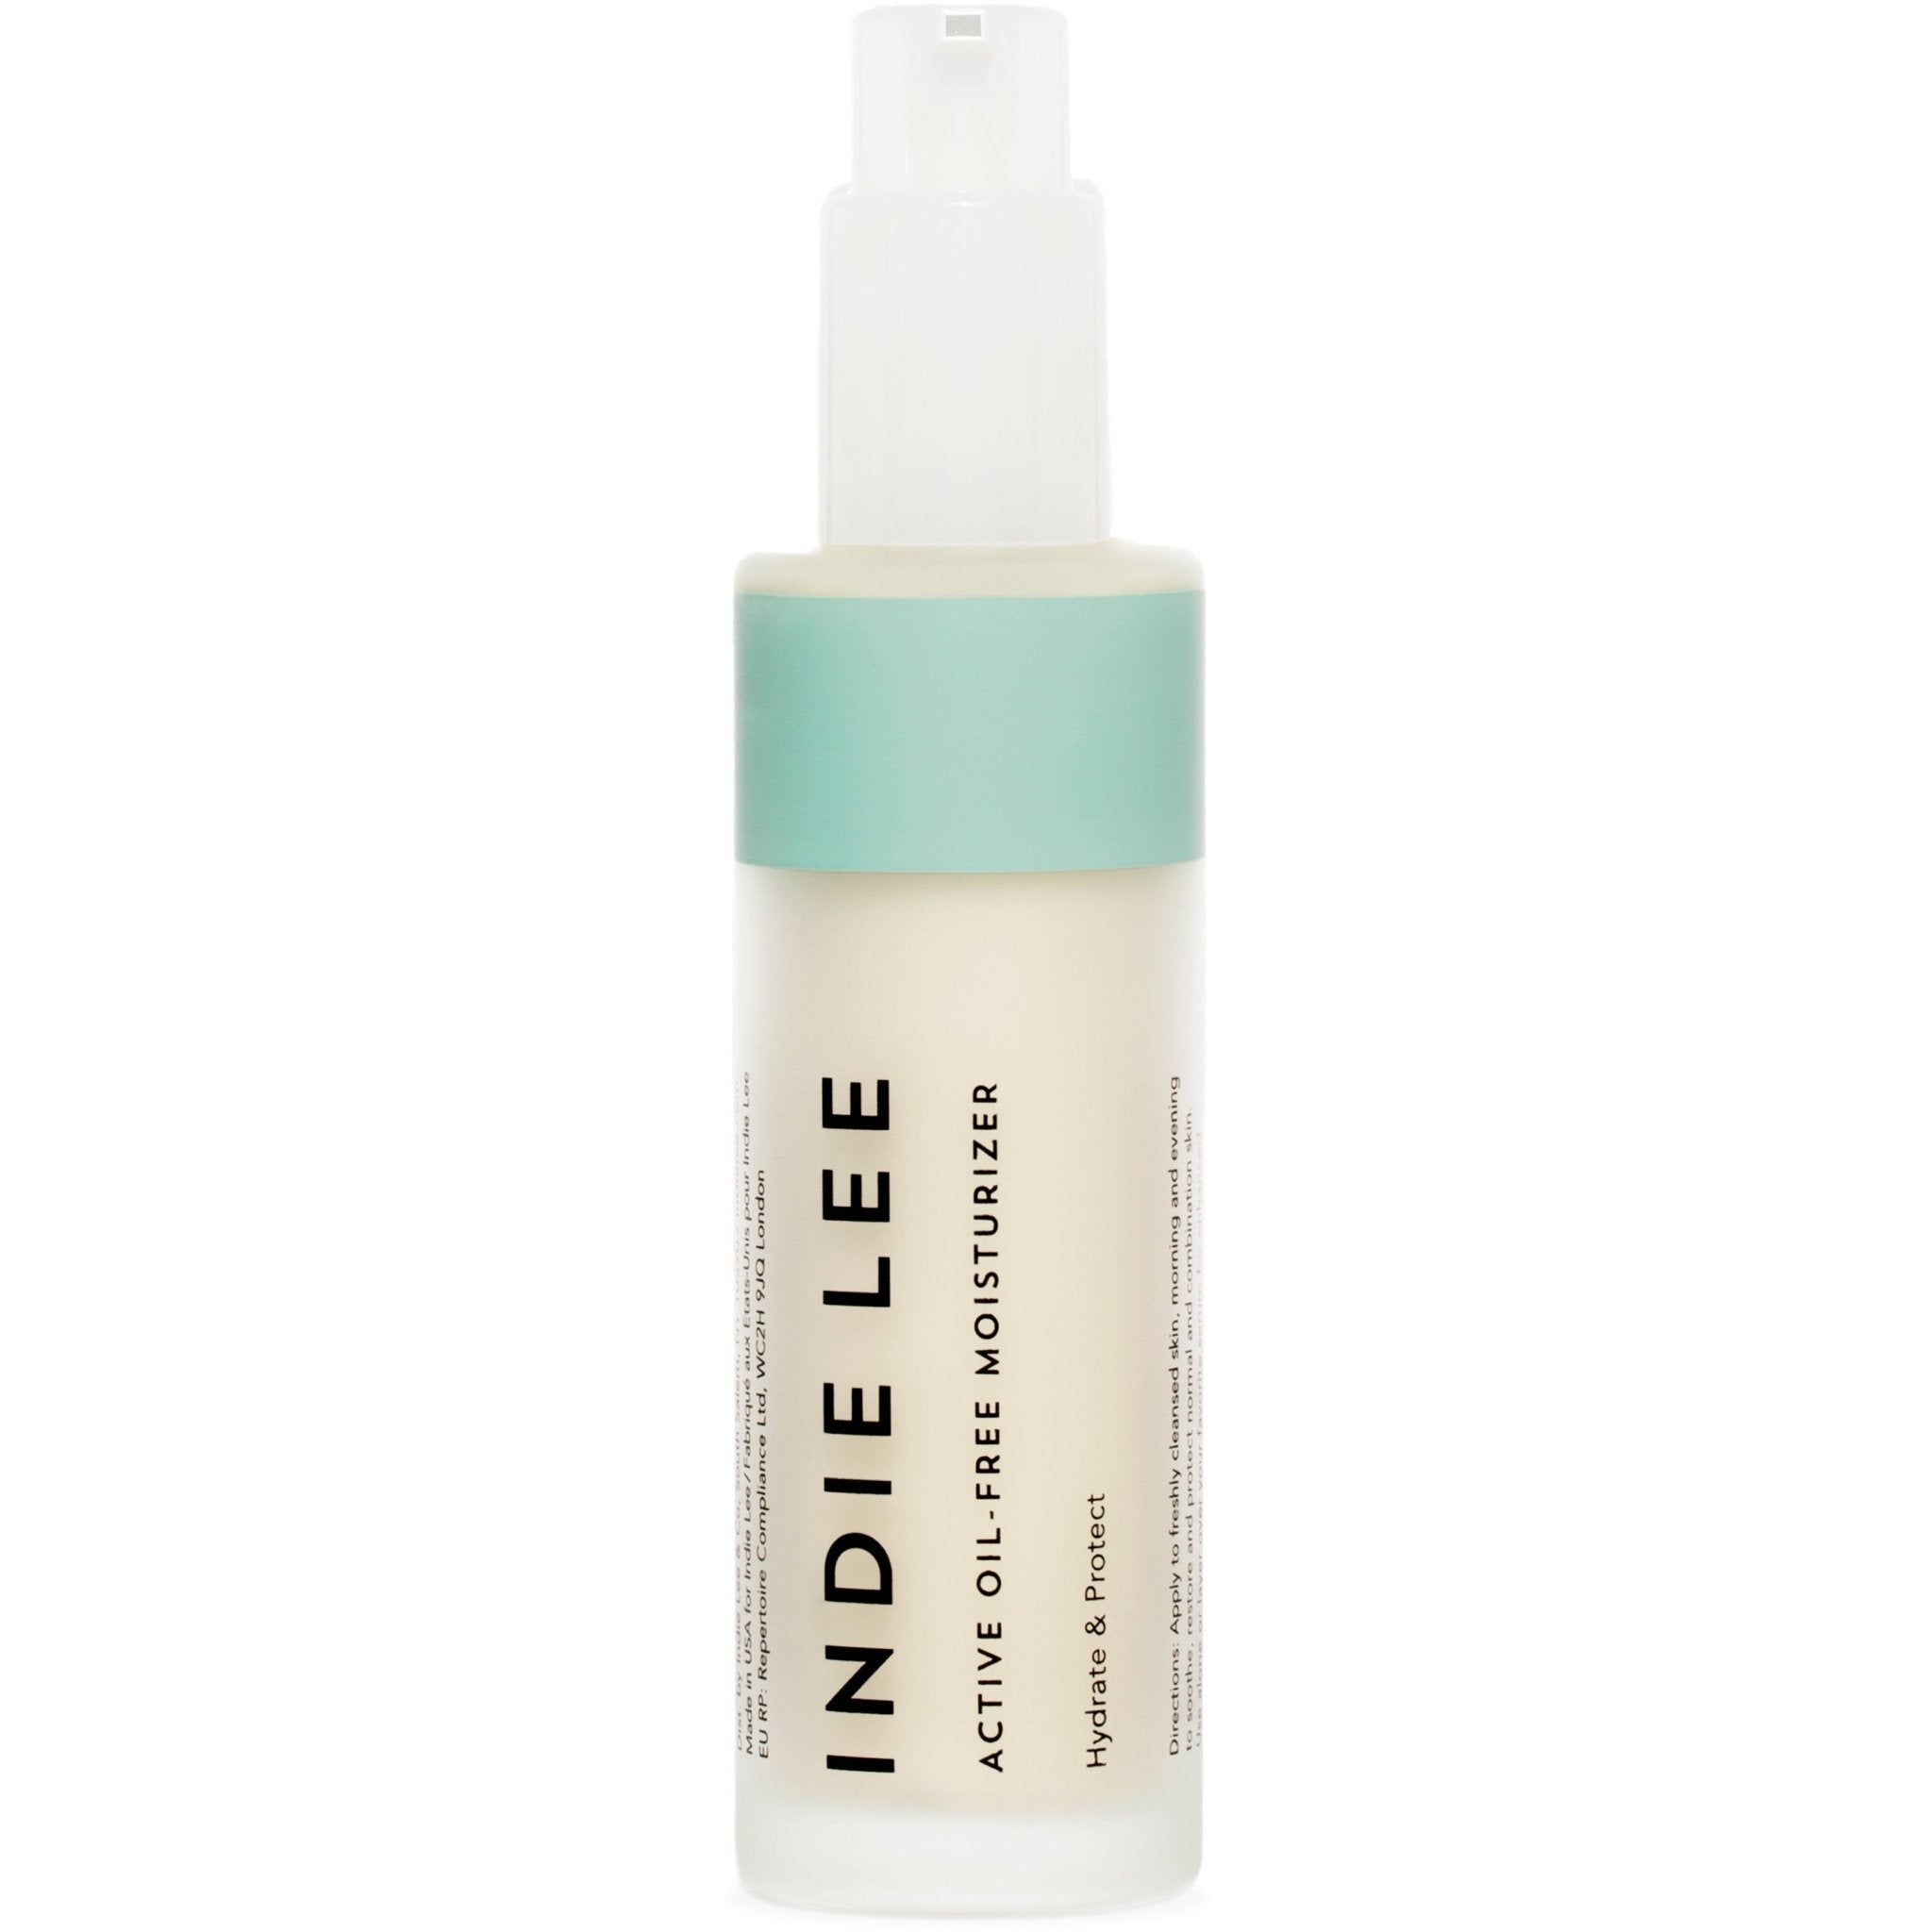 Active Oil-Free Moisturizer by Indie Lee